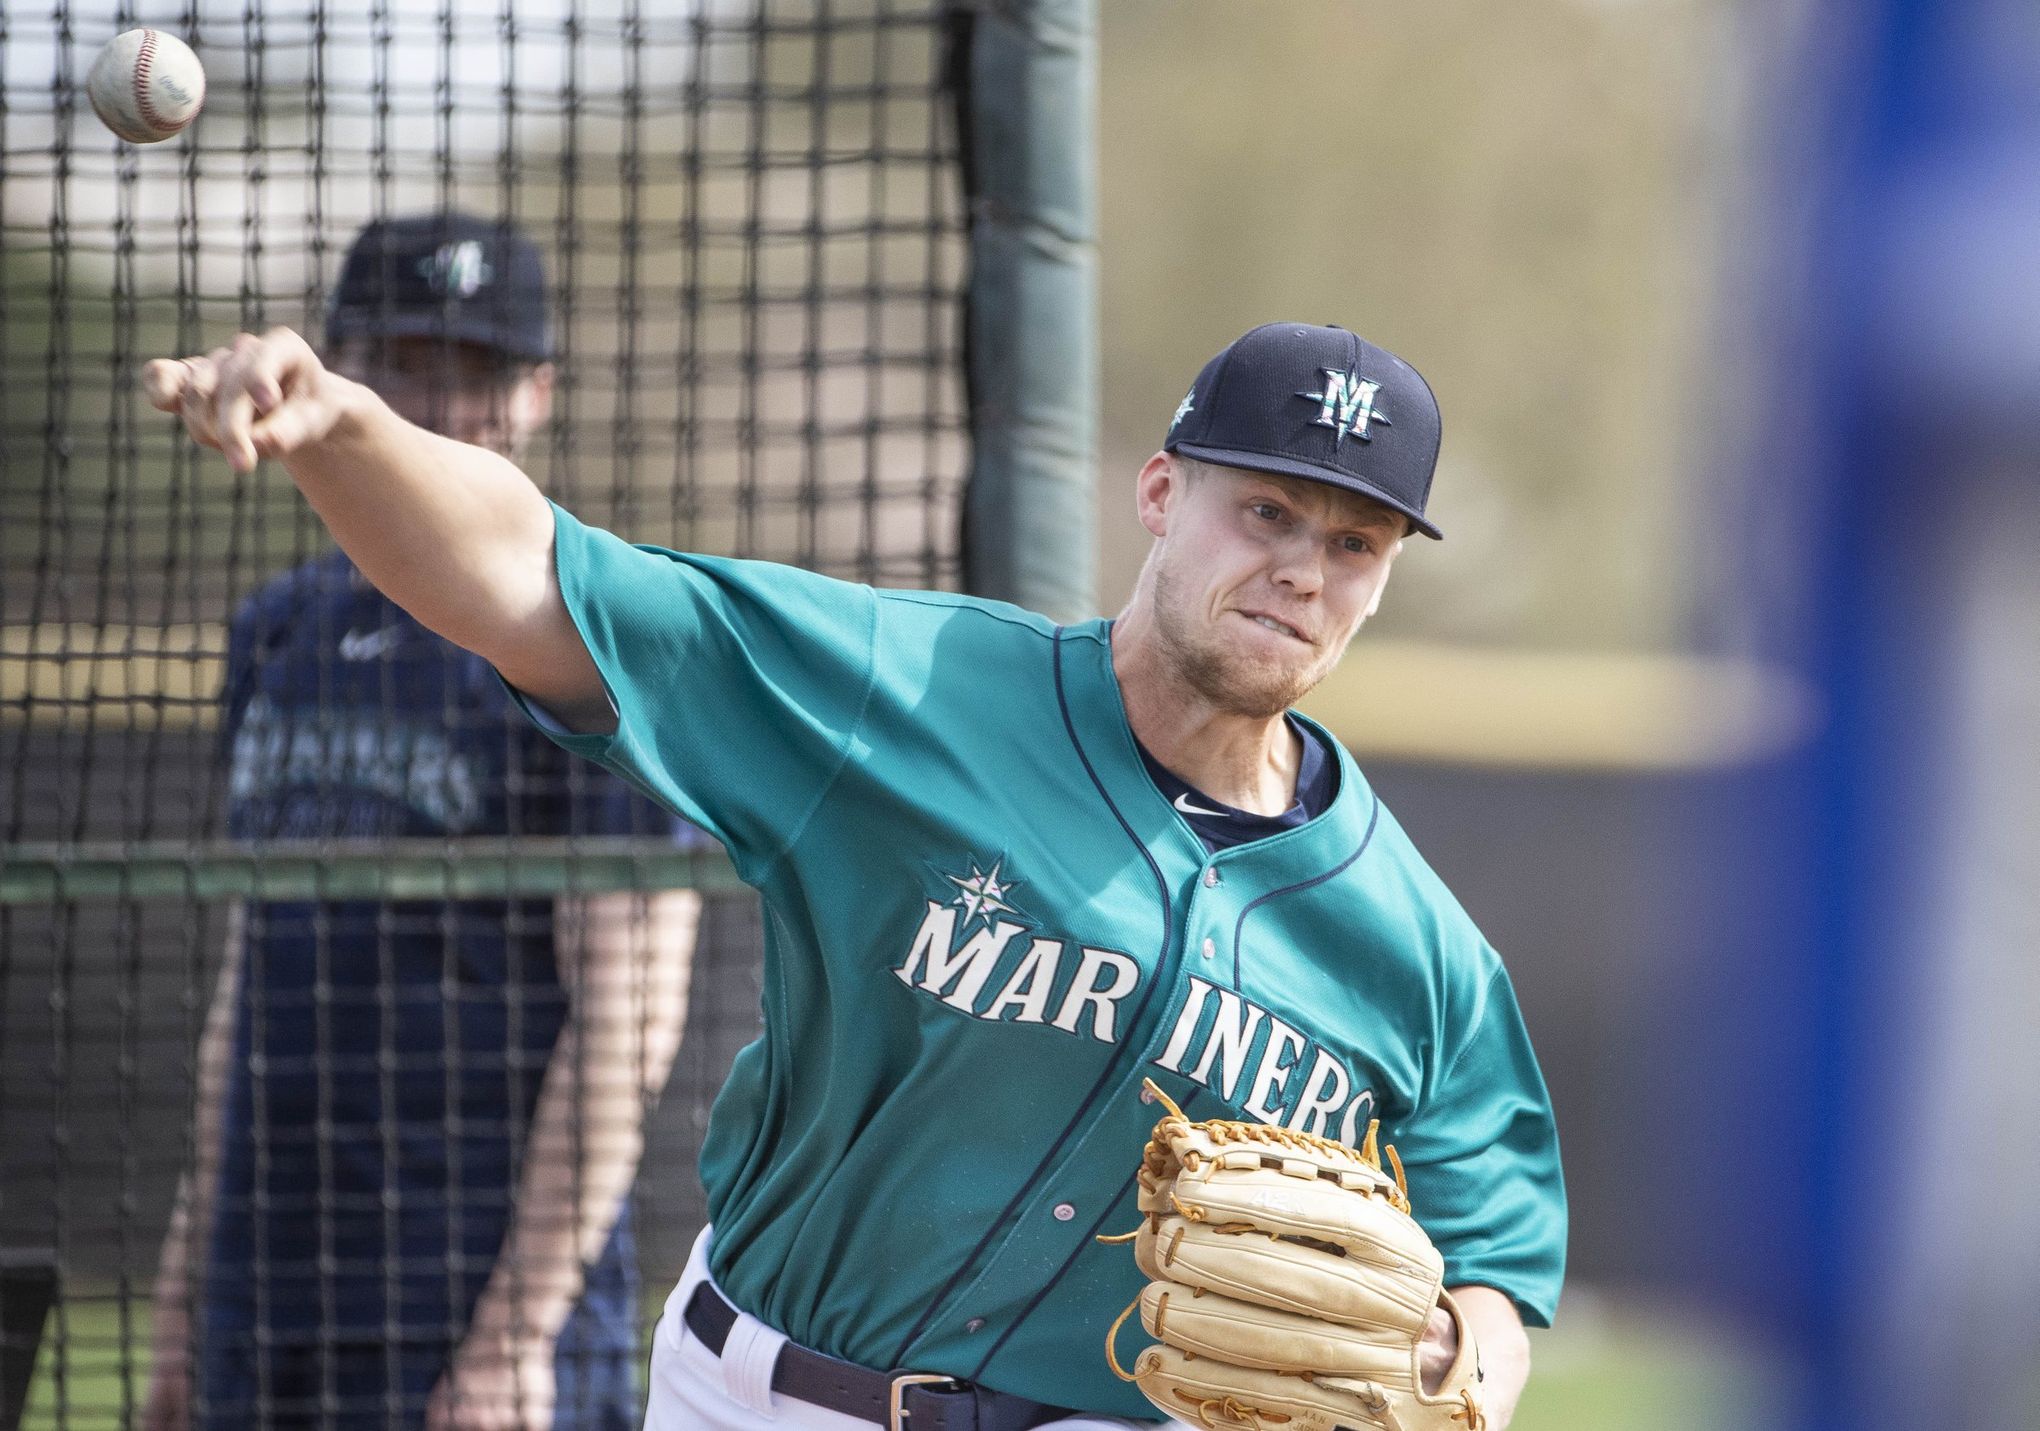 Minor leaguers take center stage at Mariners complex in Arizona as